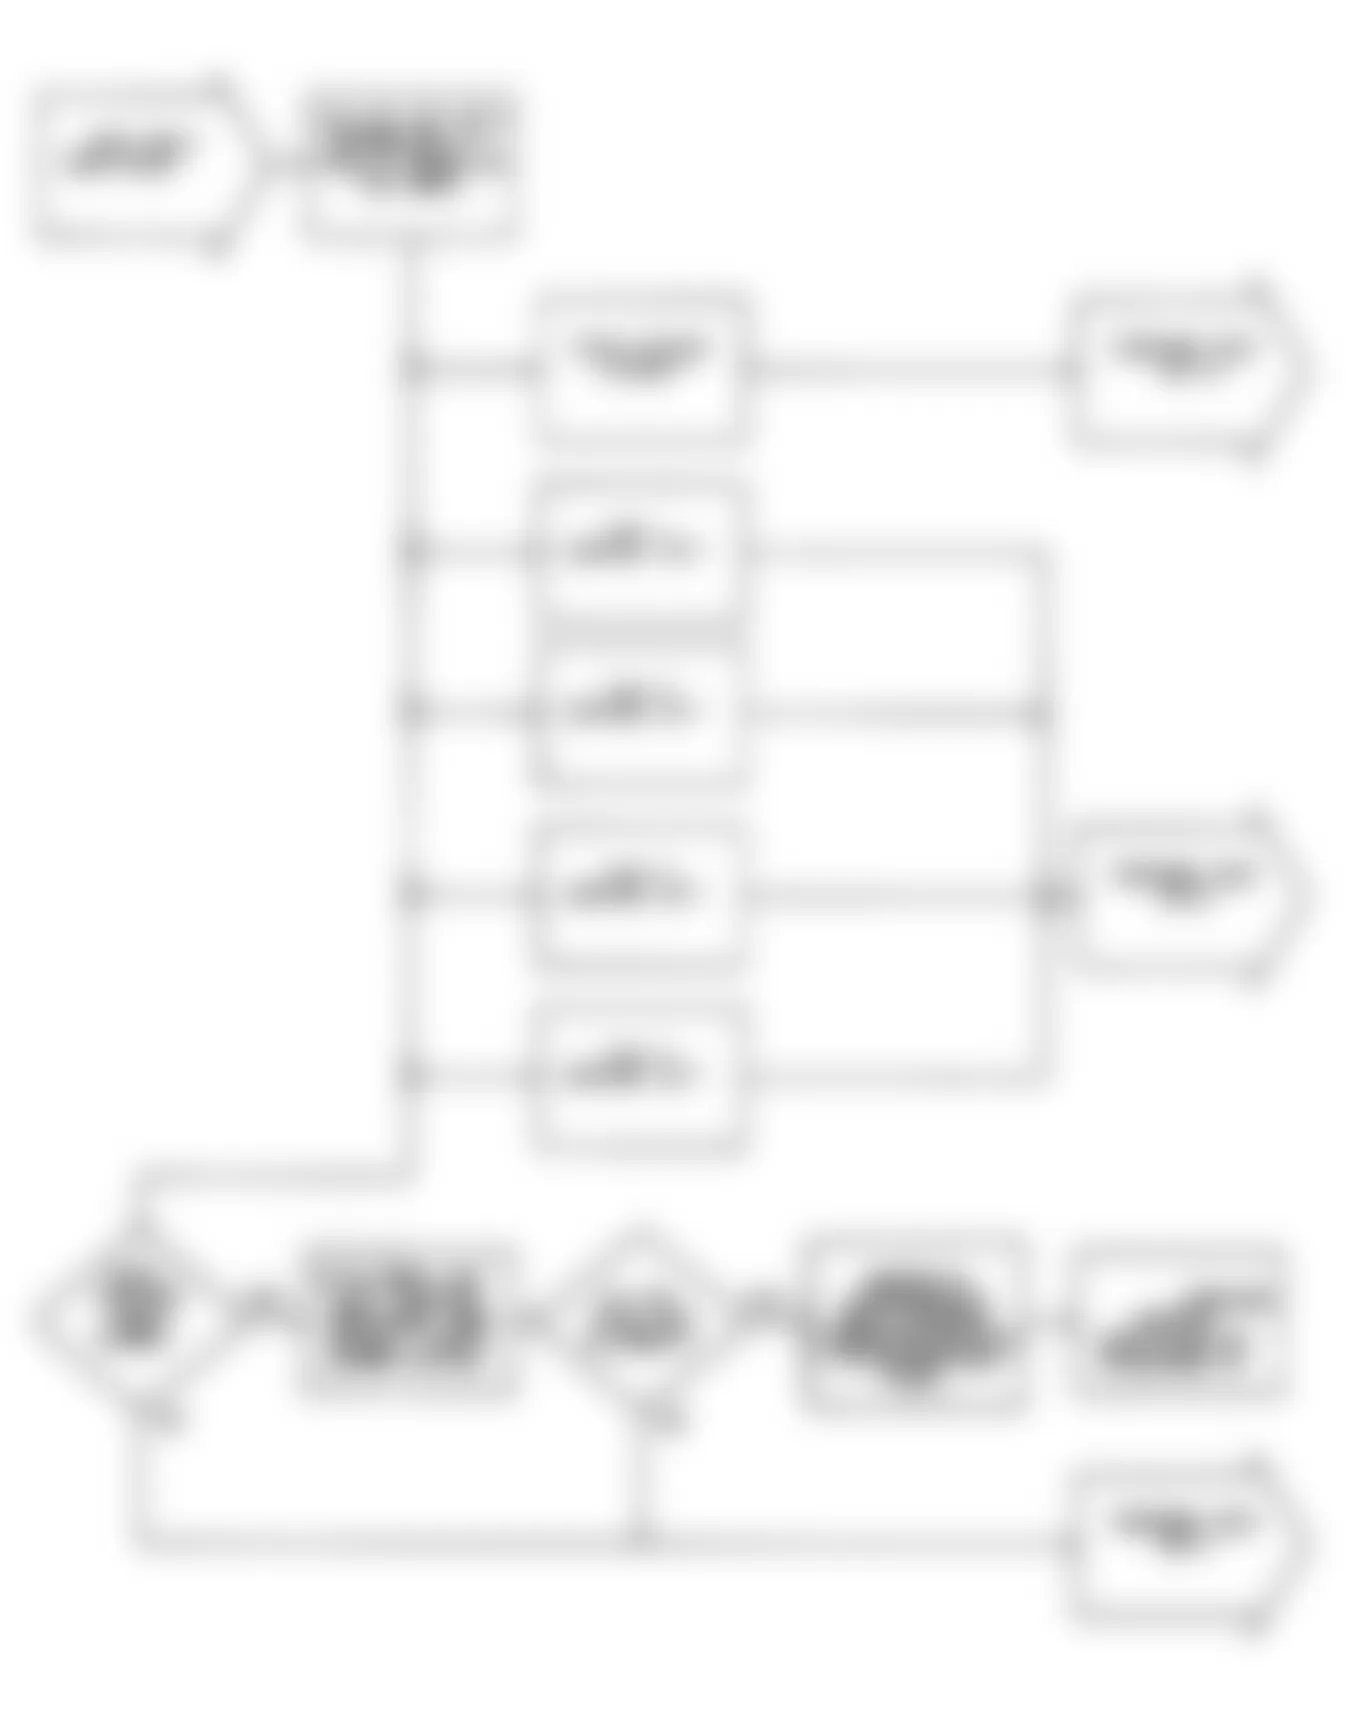 Dodge Daytona Shelby 1990 - Component Locations -  NS-2: Flow Chart (2 of 2)